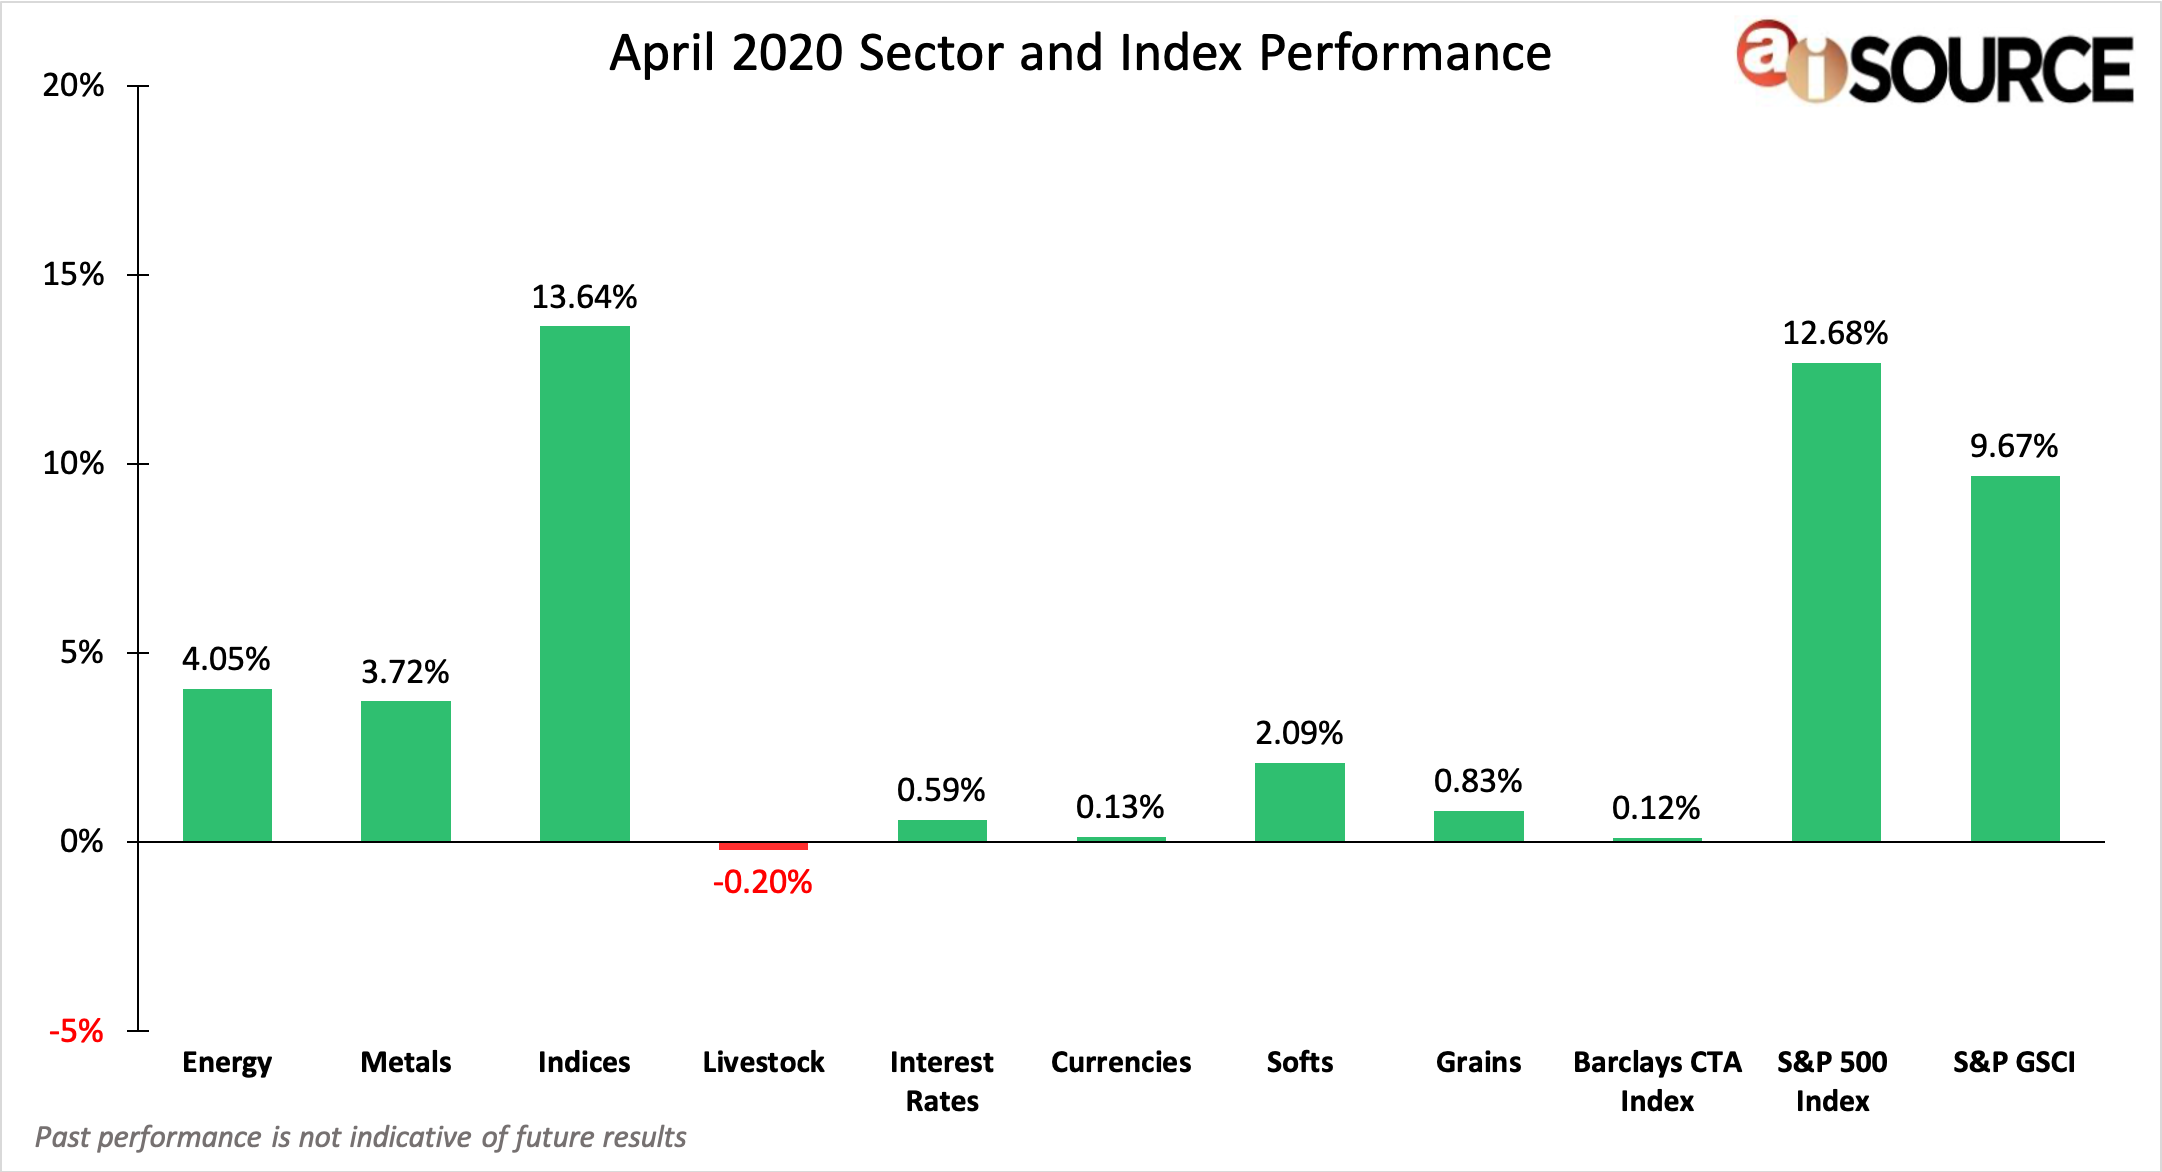 April 2020 Sector and Index Performance